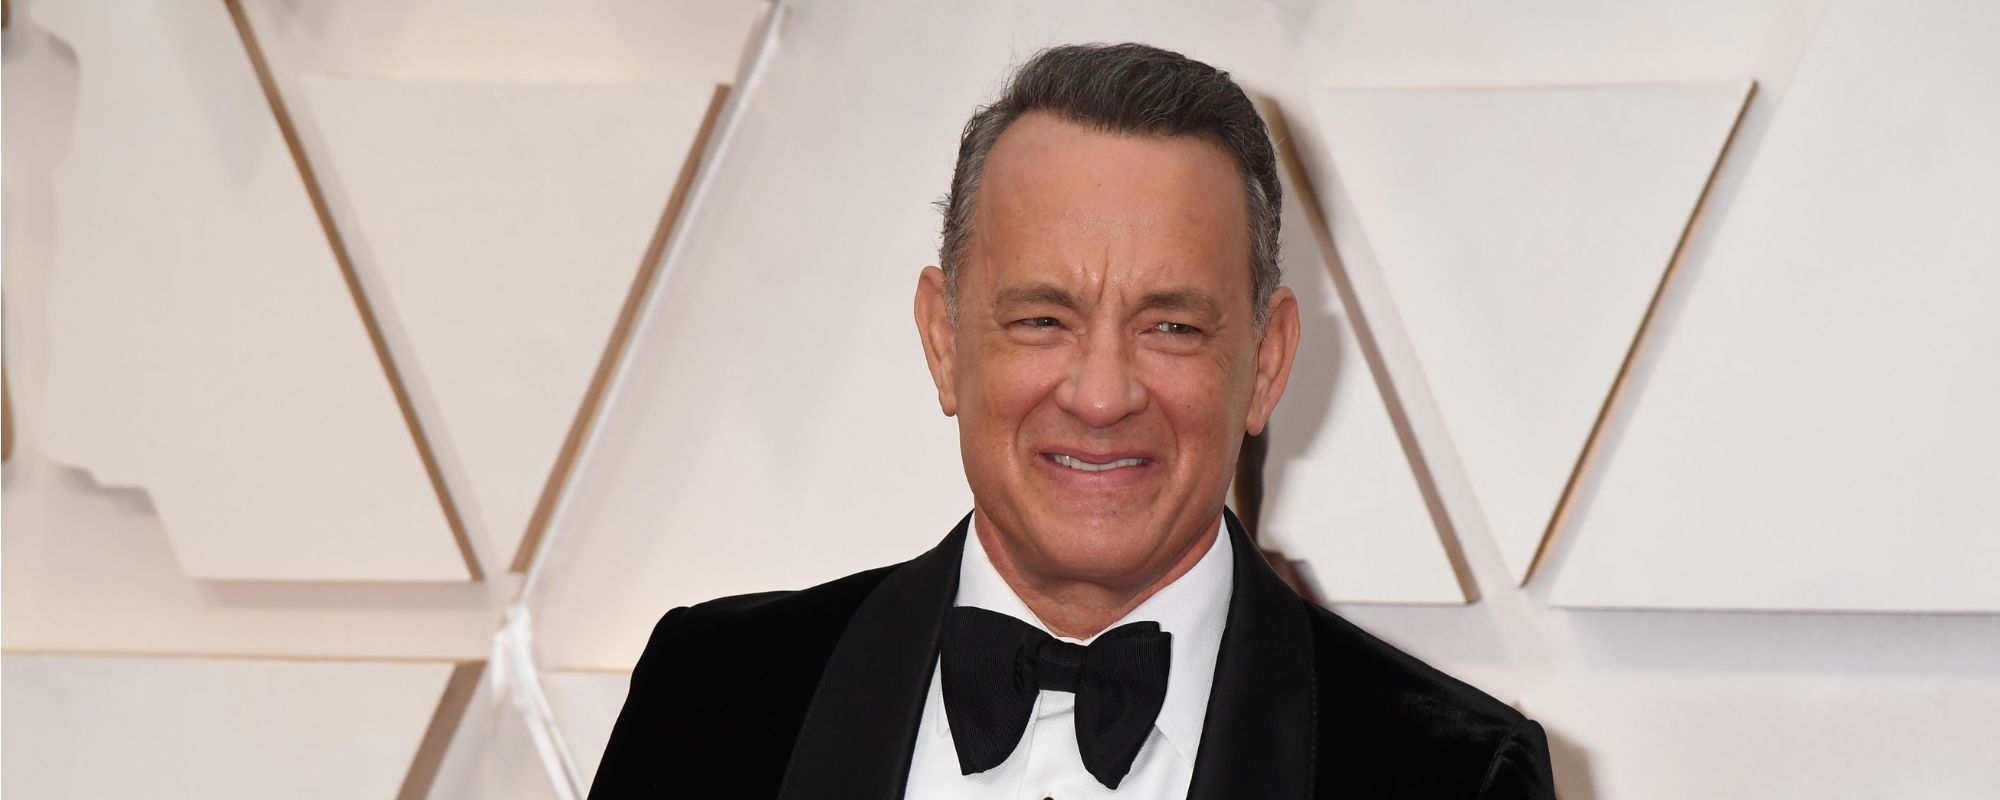 3 Songs You Didn’t Know Tom Hanks Actually Sings